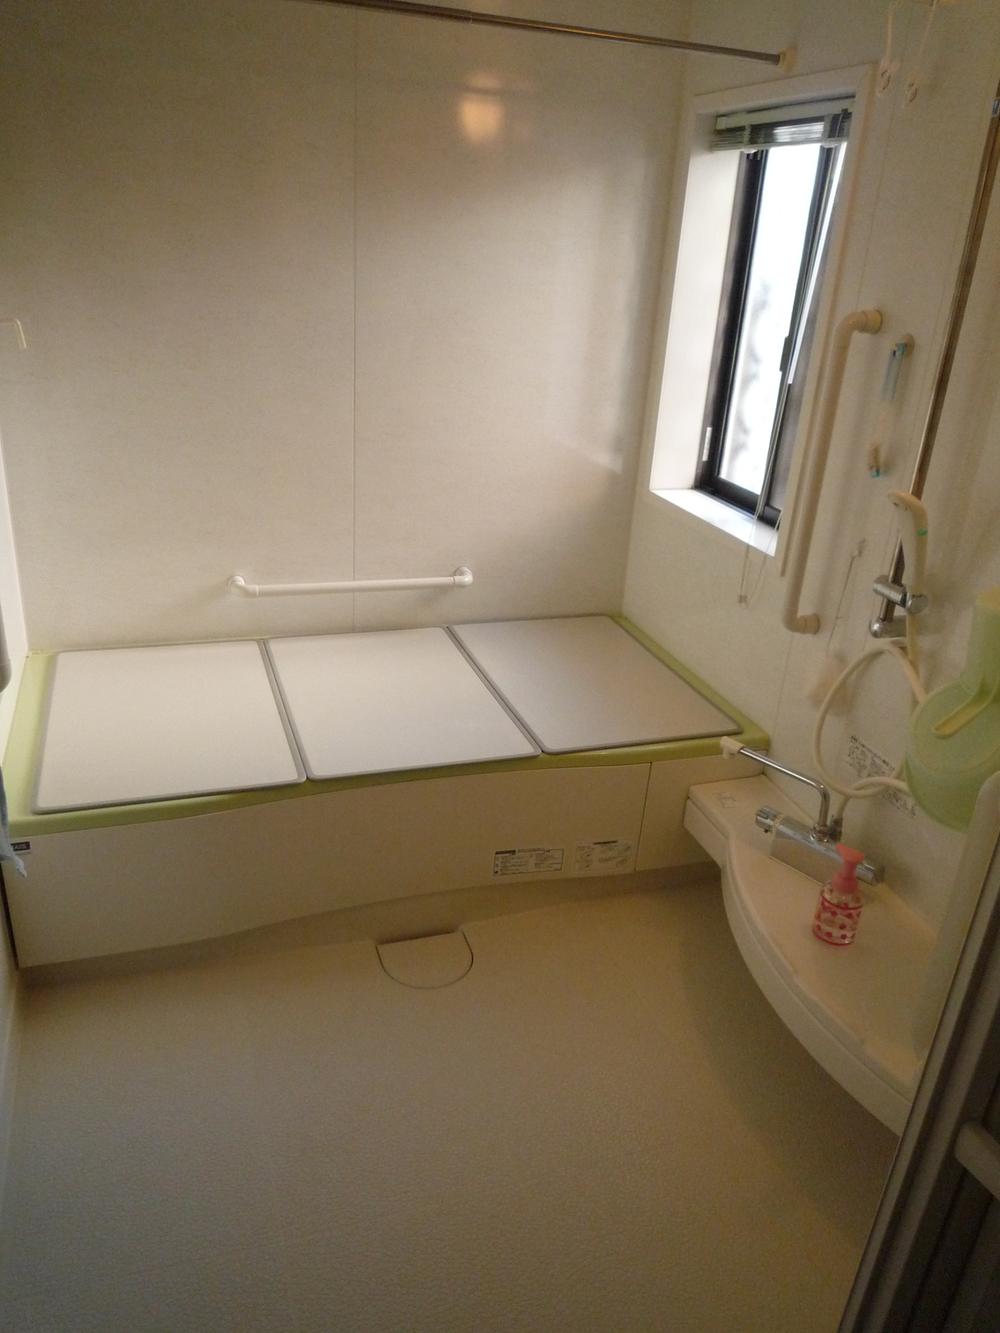 Bathroom. About 1.2 square meters affluent bathroom ☆ Heal daily fatigue.